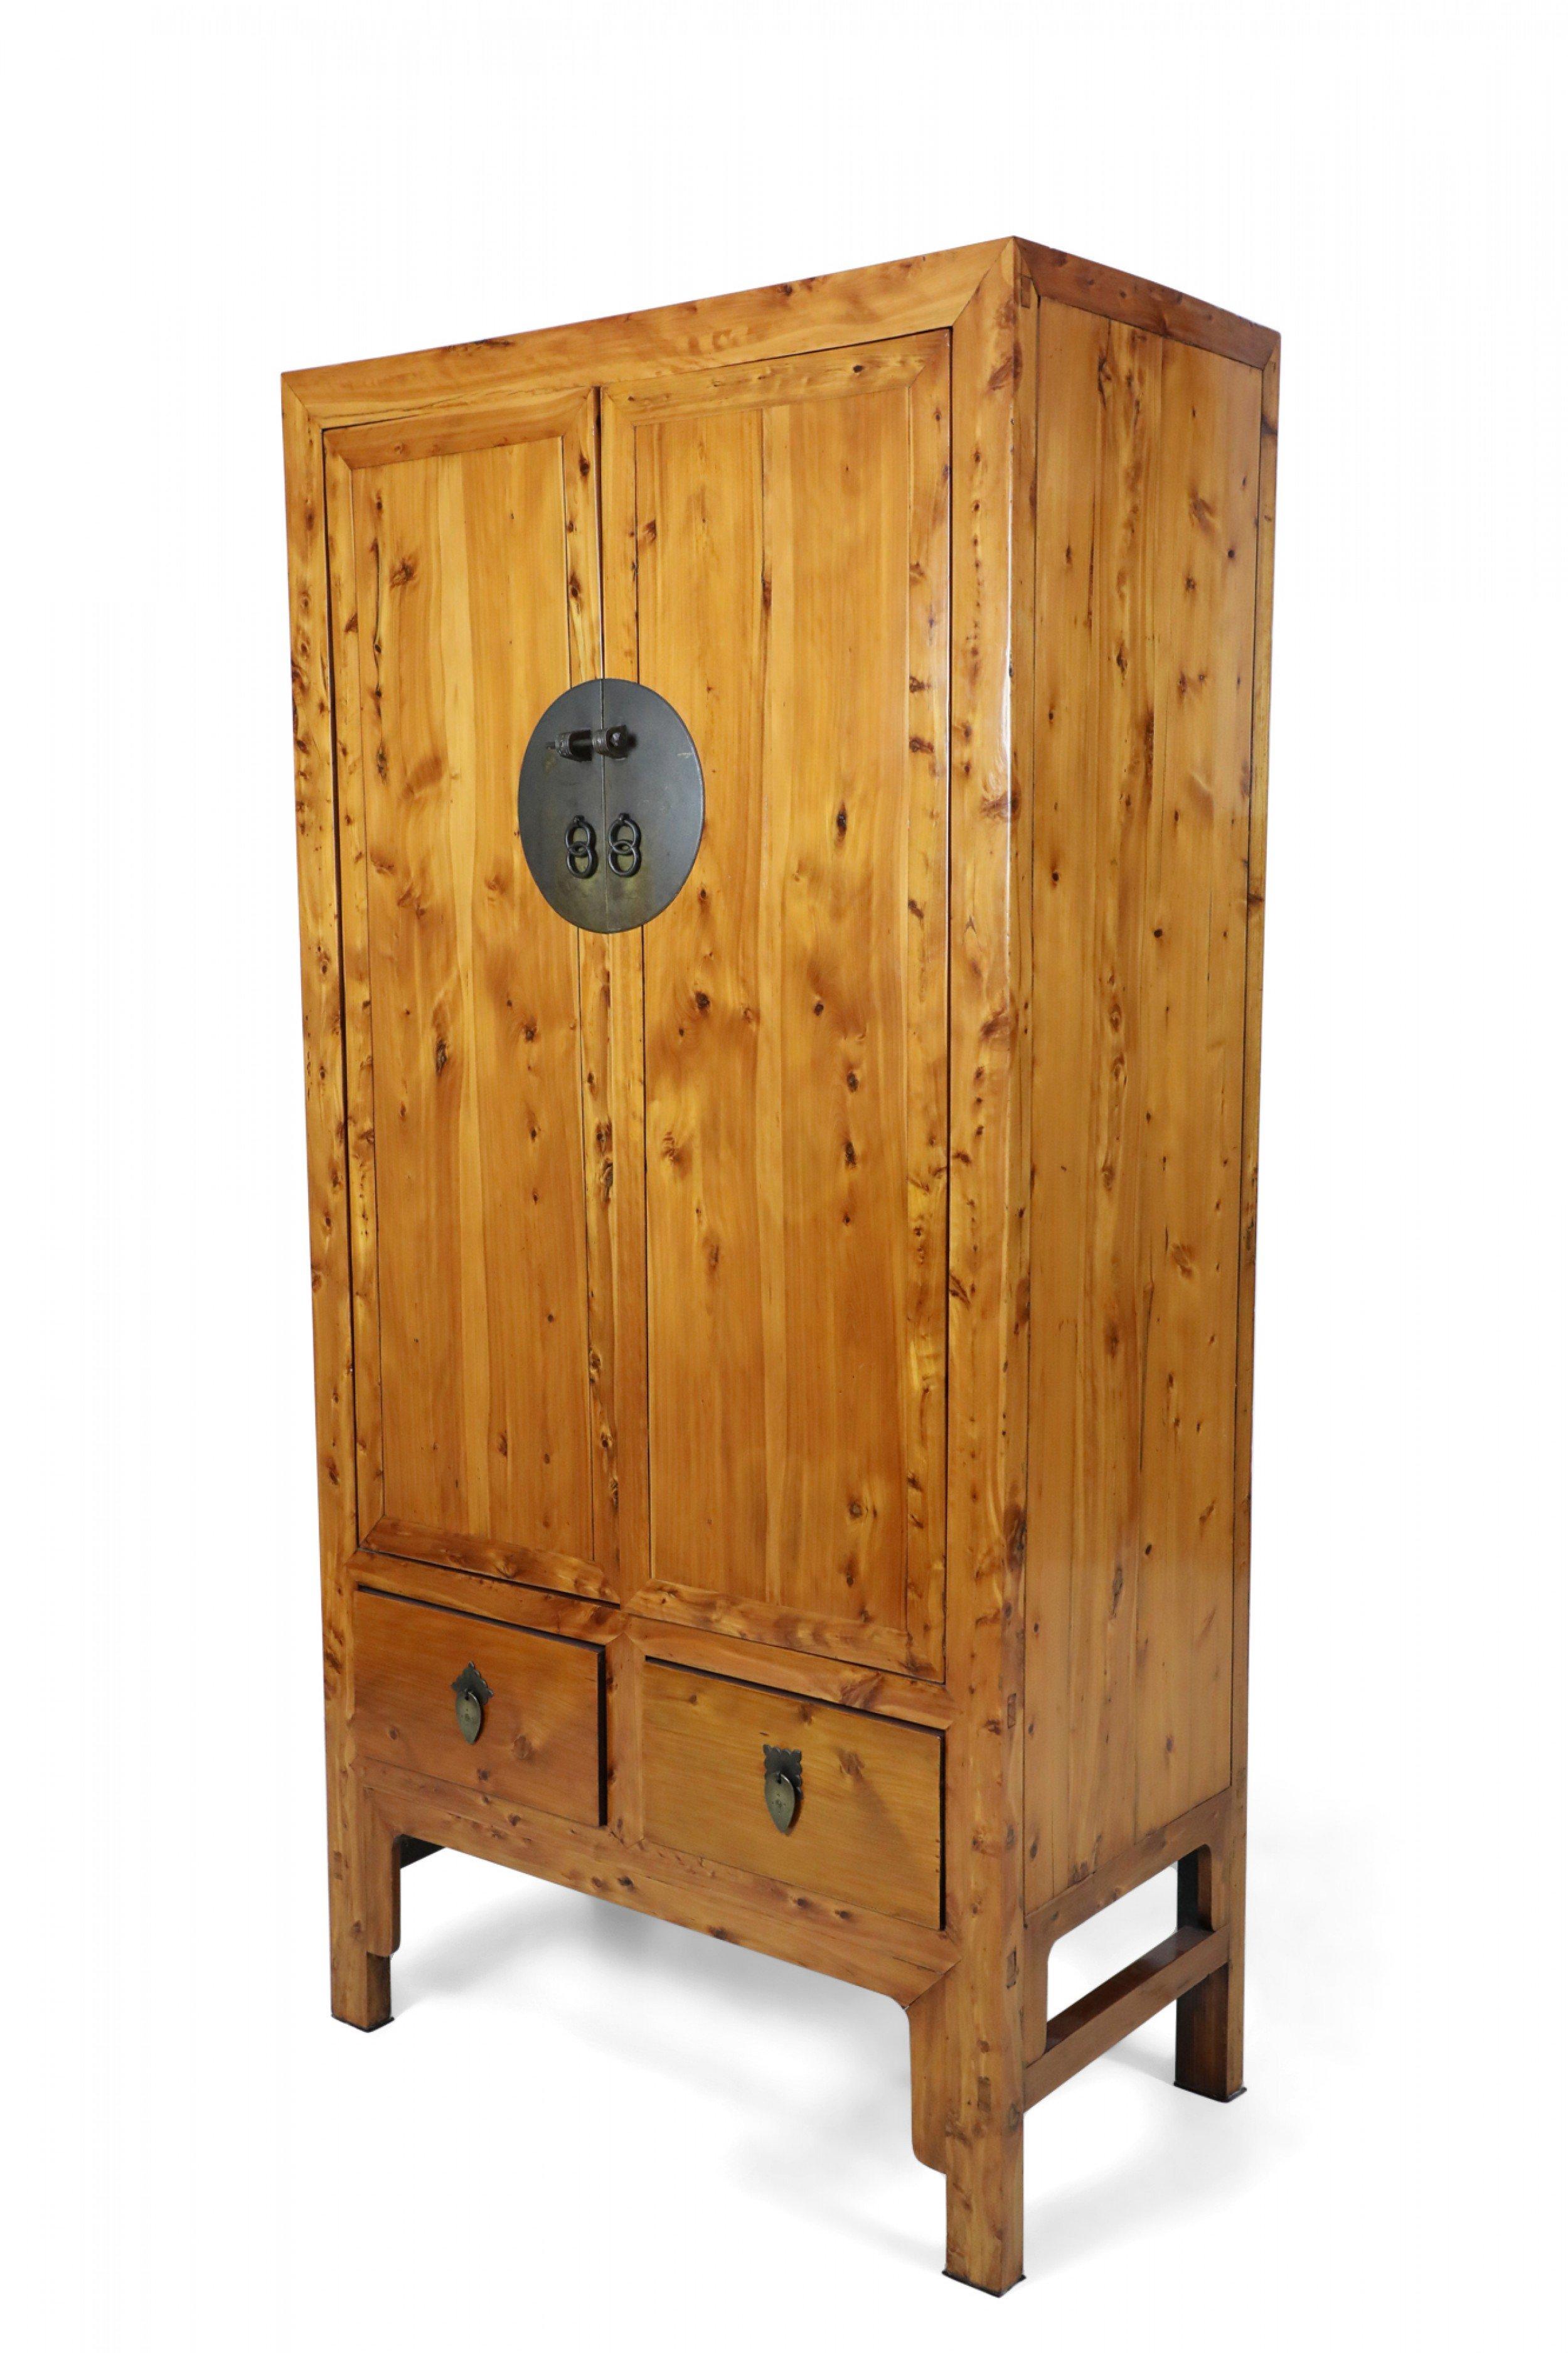 Chinese (19th Century) hardwood cabinet / armoire with large bronze barrel pin closure on the front 2 doors which have 2 interior pull drawers with 2 additional drawers beneath the armoire doors with leaf shaped bronze drawer pulls.